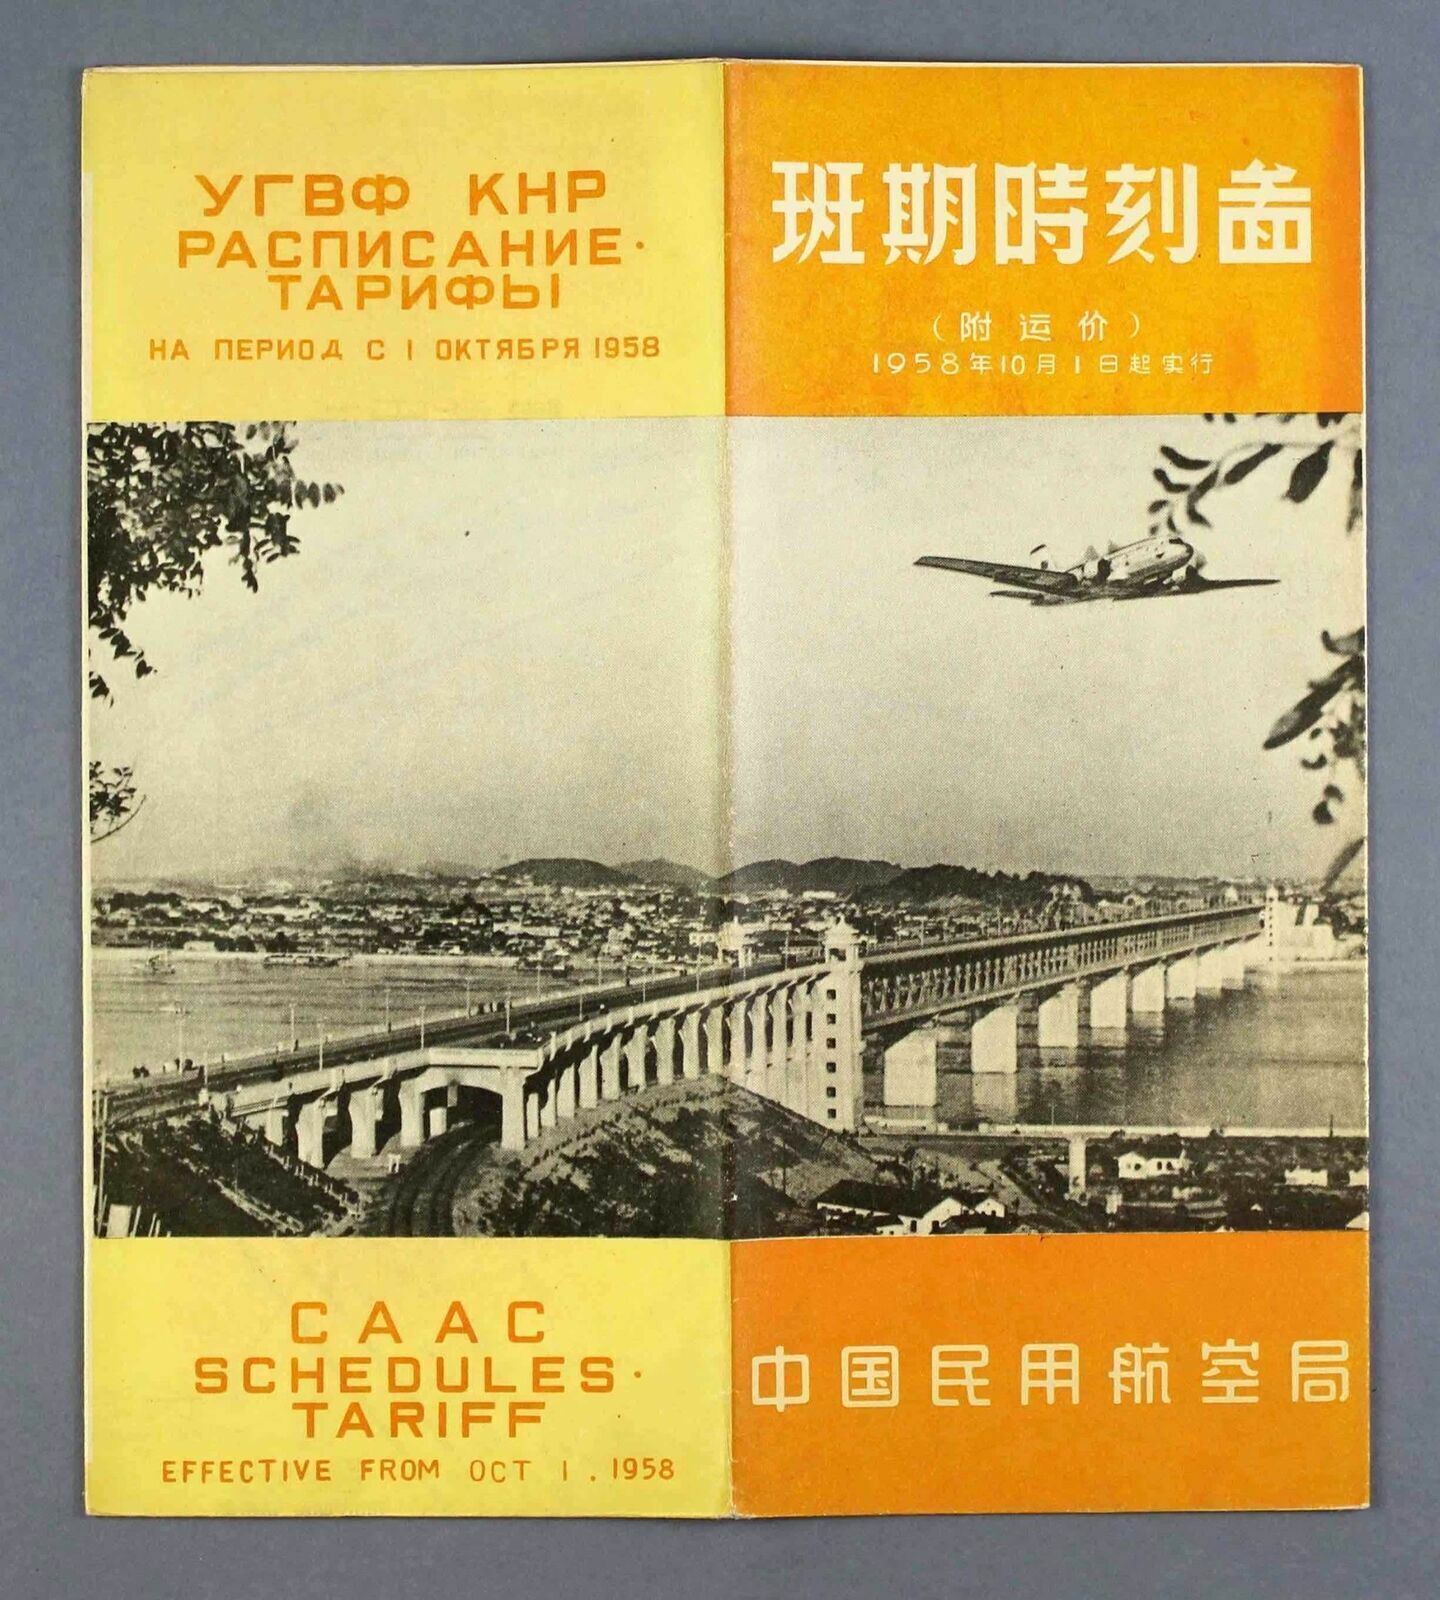 CAAC AIRLNE TIMETABLE OCTOBER 1958 CIVIL AVIATION ADMINISTRATION OF CHINA